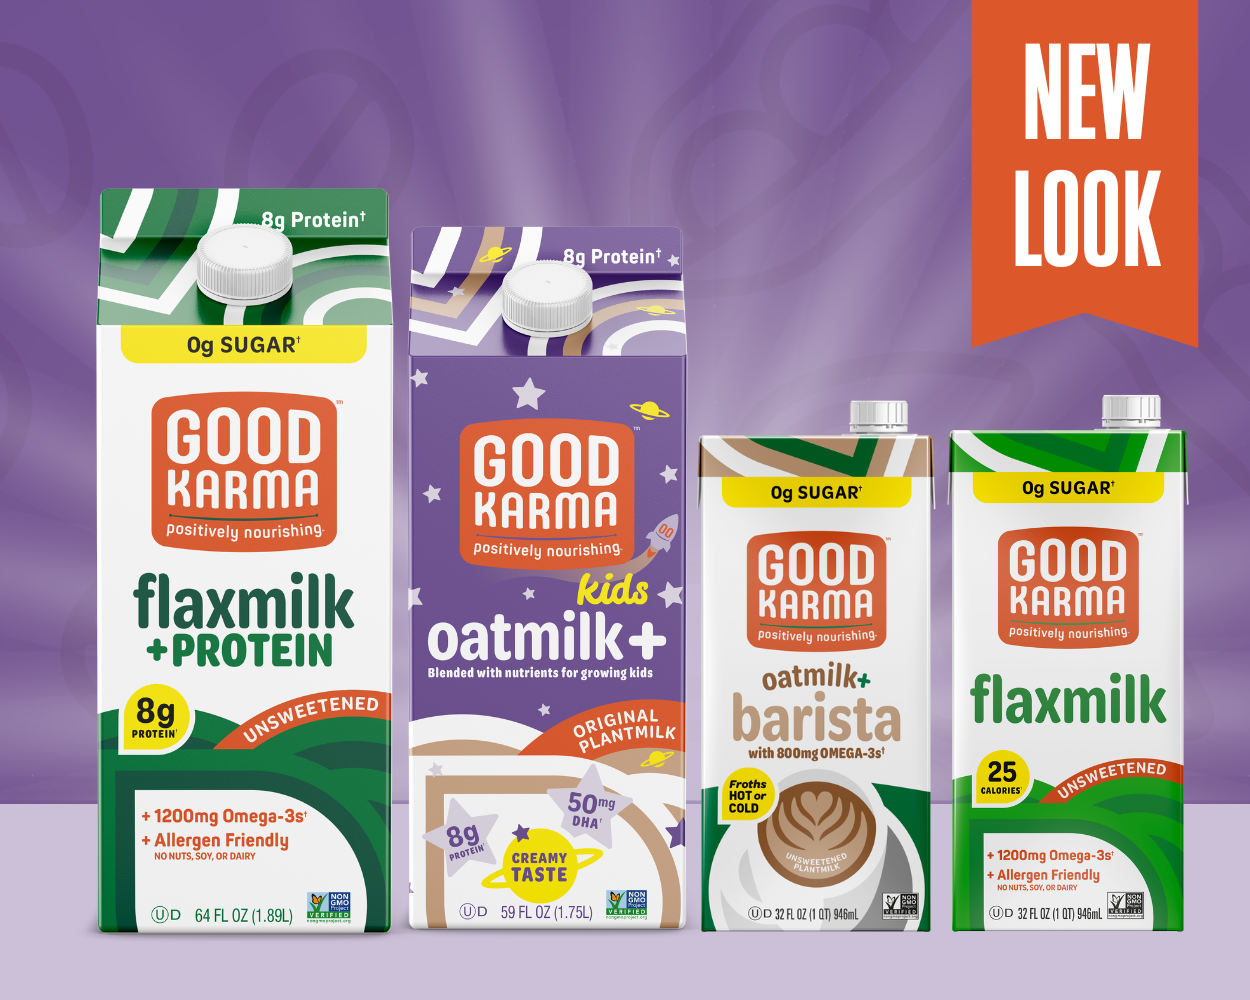 Good Karma has refocused on core plant-based beverages and beverage innovation, and recently lauched a strategic brand and packaging redesign.